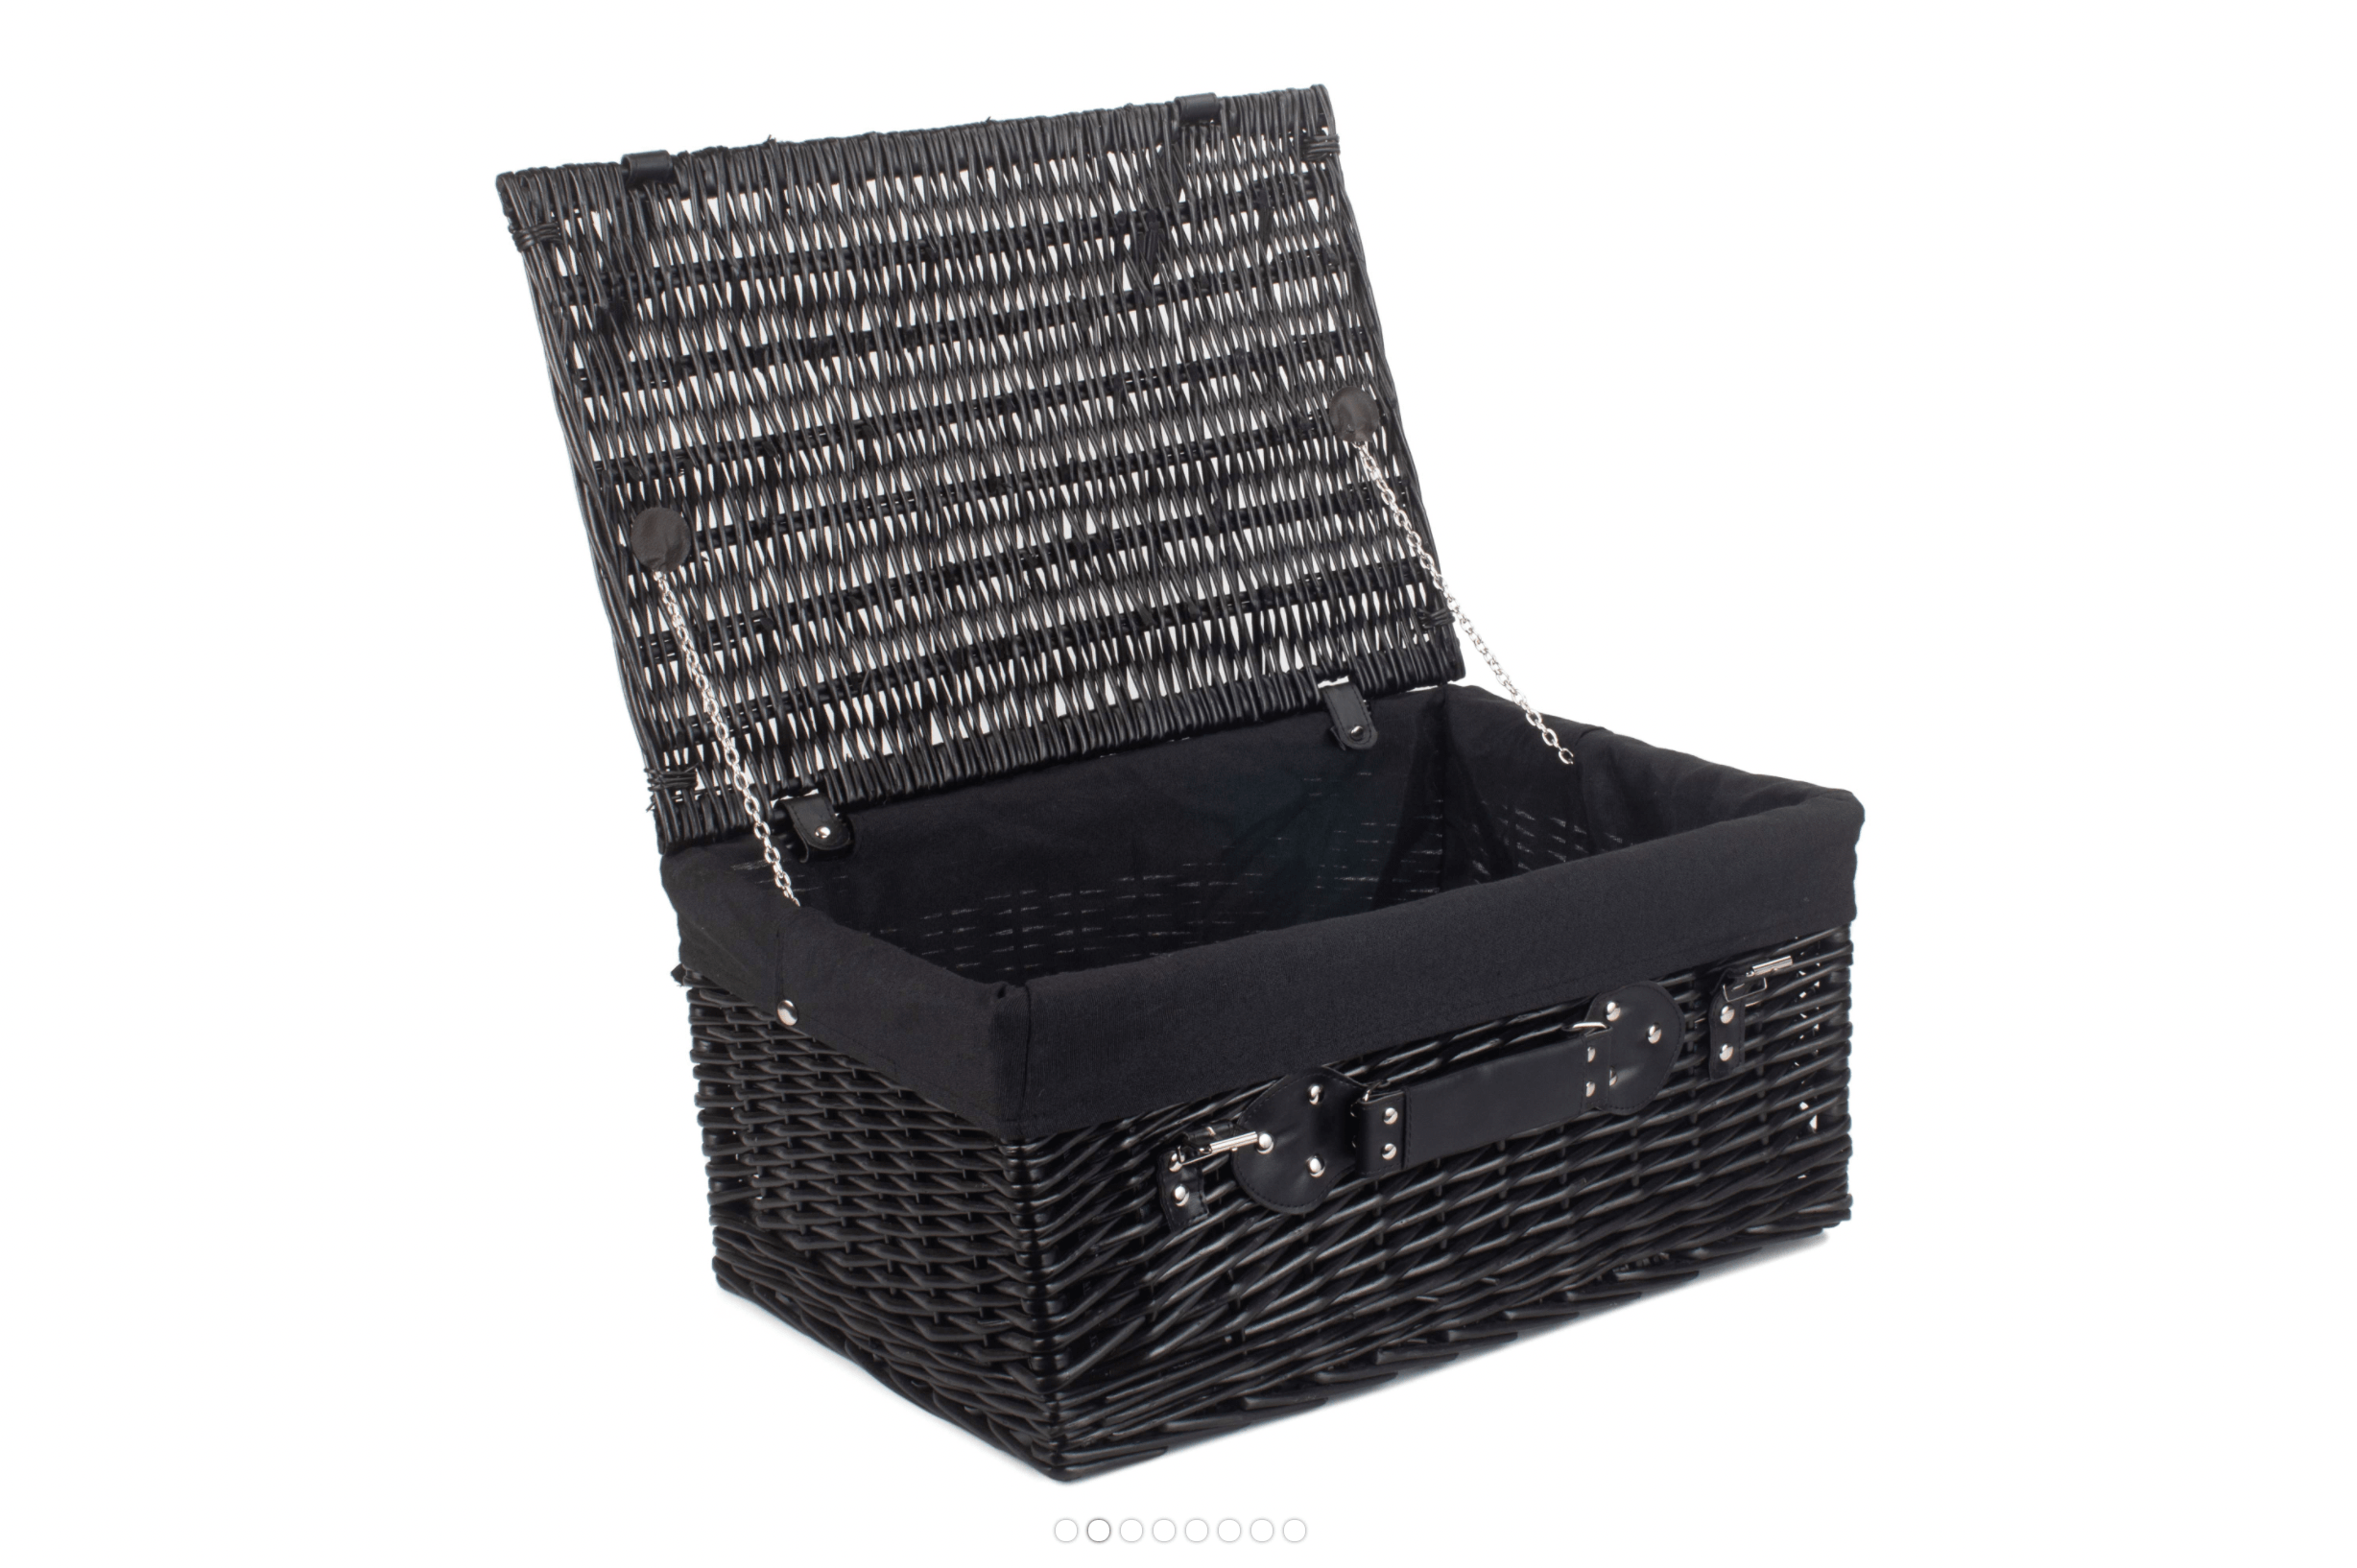 Empty Black Willow Hamper with Black Lining 14" - Celebration Cheeses